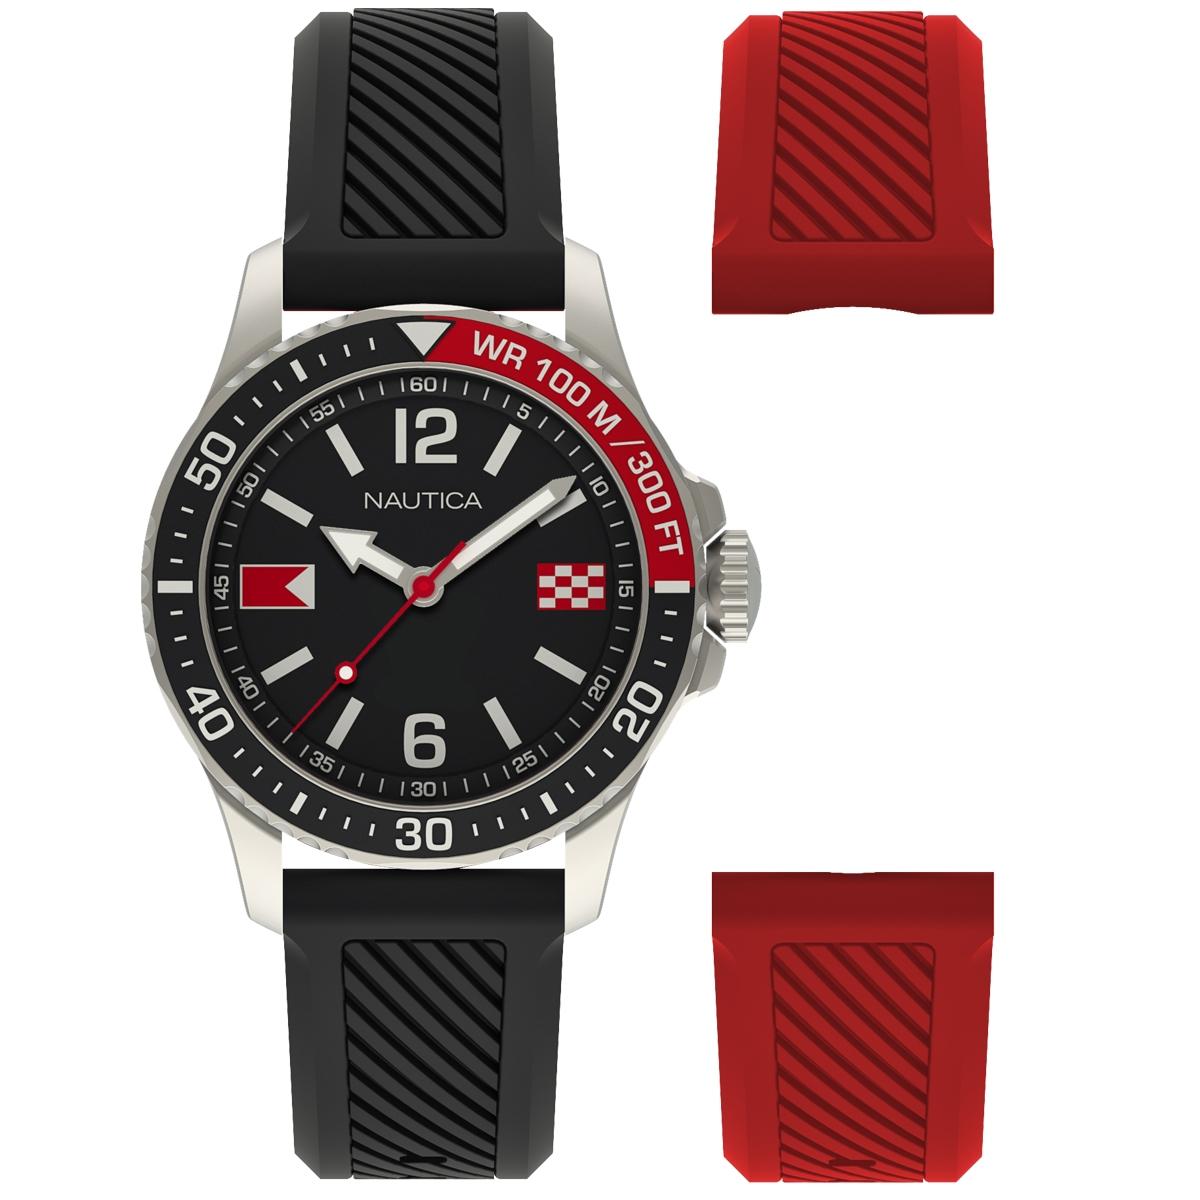 NAUTICA Freeboard Flags Gift Set - NAPFRB926, Silver case with Stainless Steel Bracelet